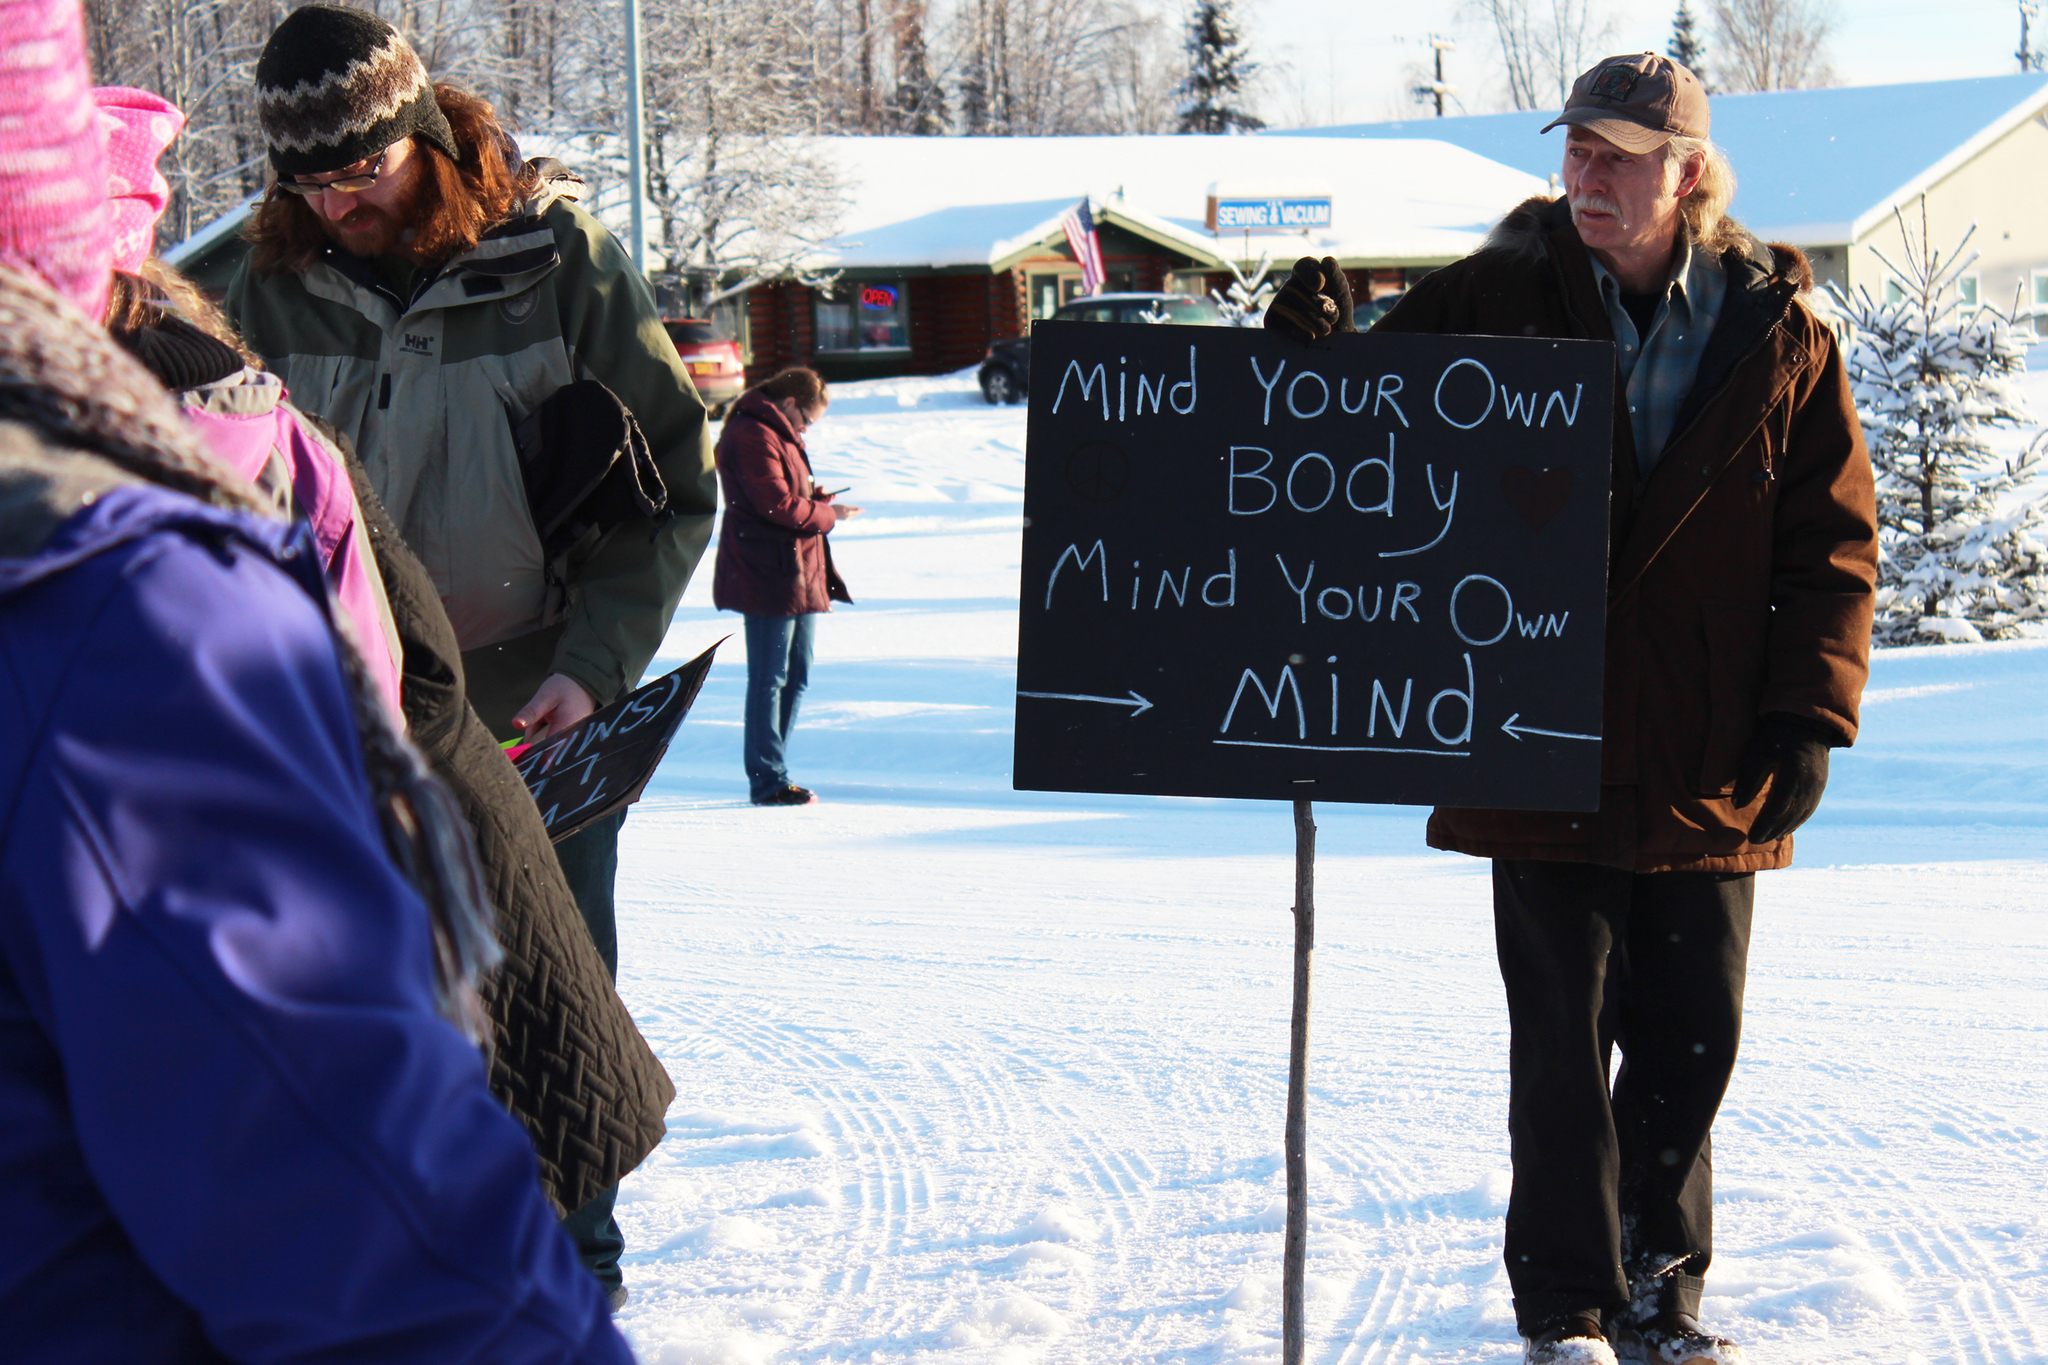 Carroll Knutson of Soldotna queues up behind a crowd of people just before taking off in a Women's March held Saturday, Jan. 21, 2017 in Soldotna, Alaska. Organizers said the march was a demonstration meant to bring area residents together to voice what they would like to see in their communities, whether it related to women's right or myriad other issues. (Megan Pacer/Peninsula Clarion)